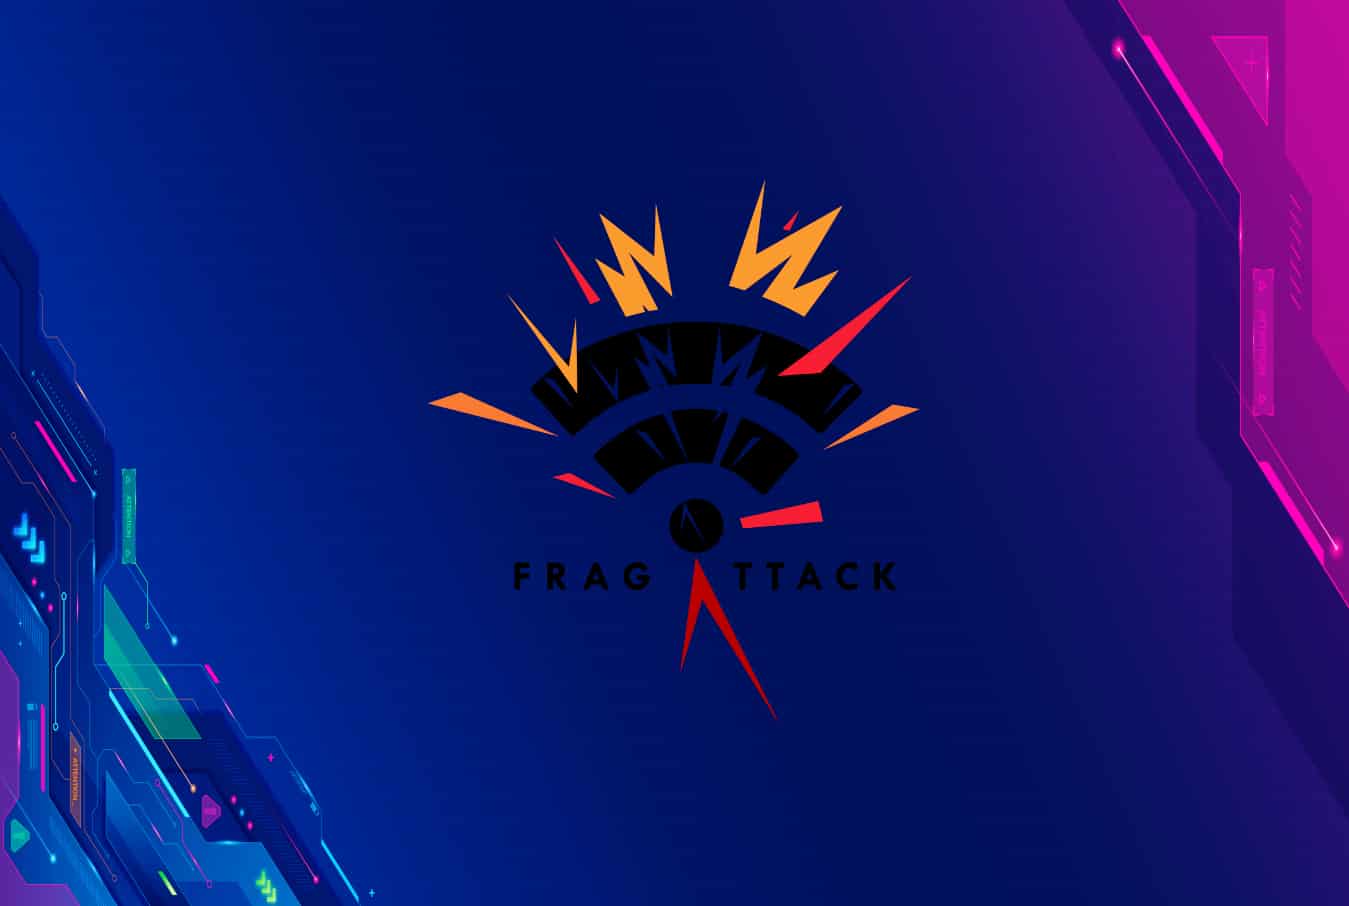 Old bugs exposing all Wi-Fi enabled devices to FragAttacks